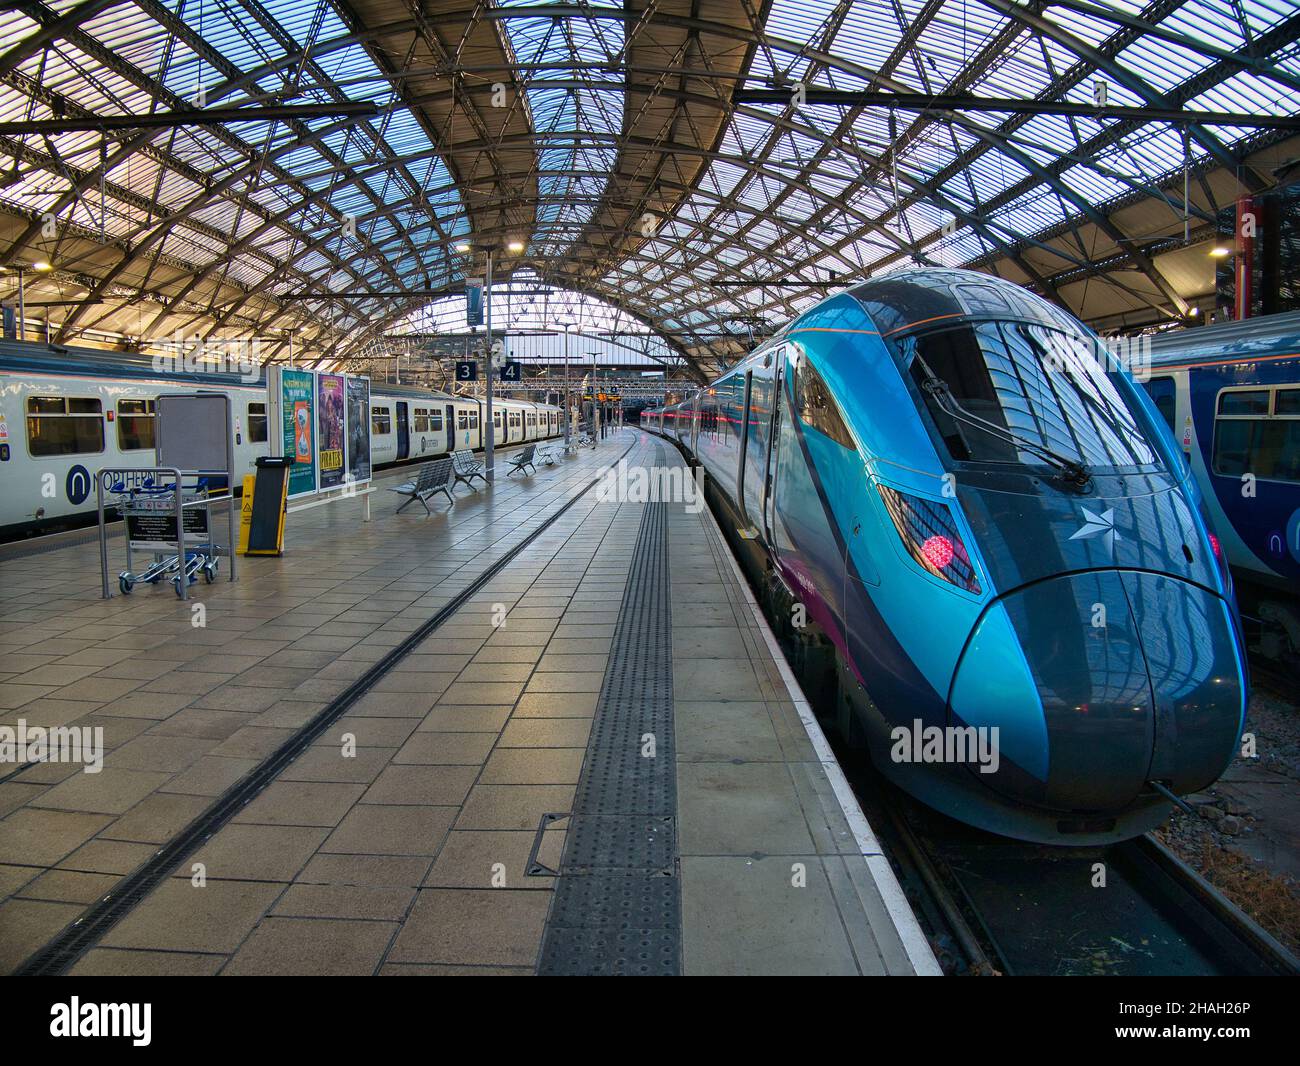 The engine of a TransPennine Express train at Lime Street Station in Liverpool, UK. The train is waiting for passengers to arrive. Stock Photo